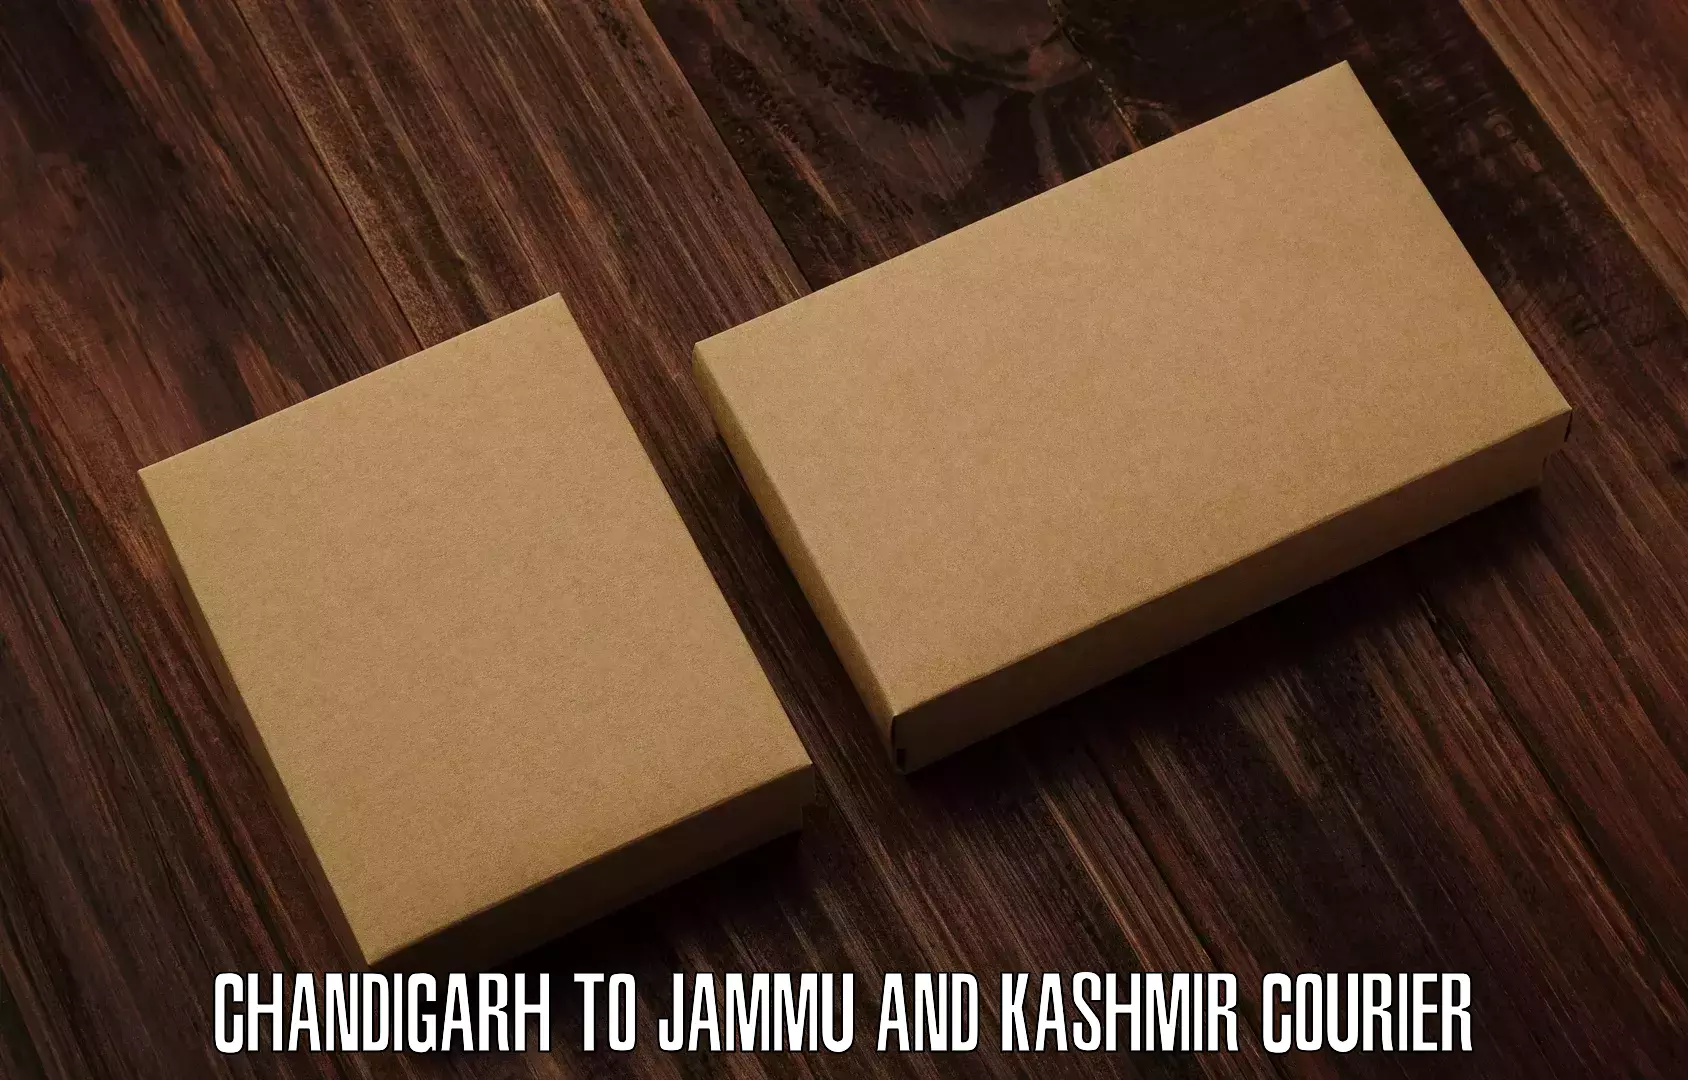 Pharmaceutical courier Chandigarh to Baramulla